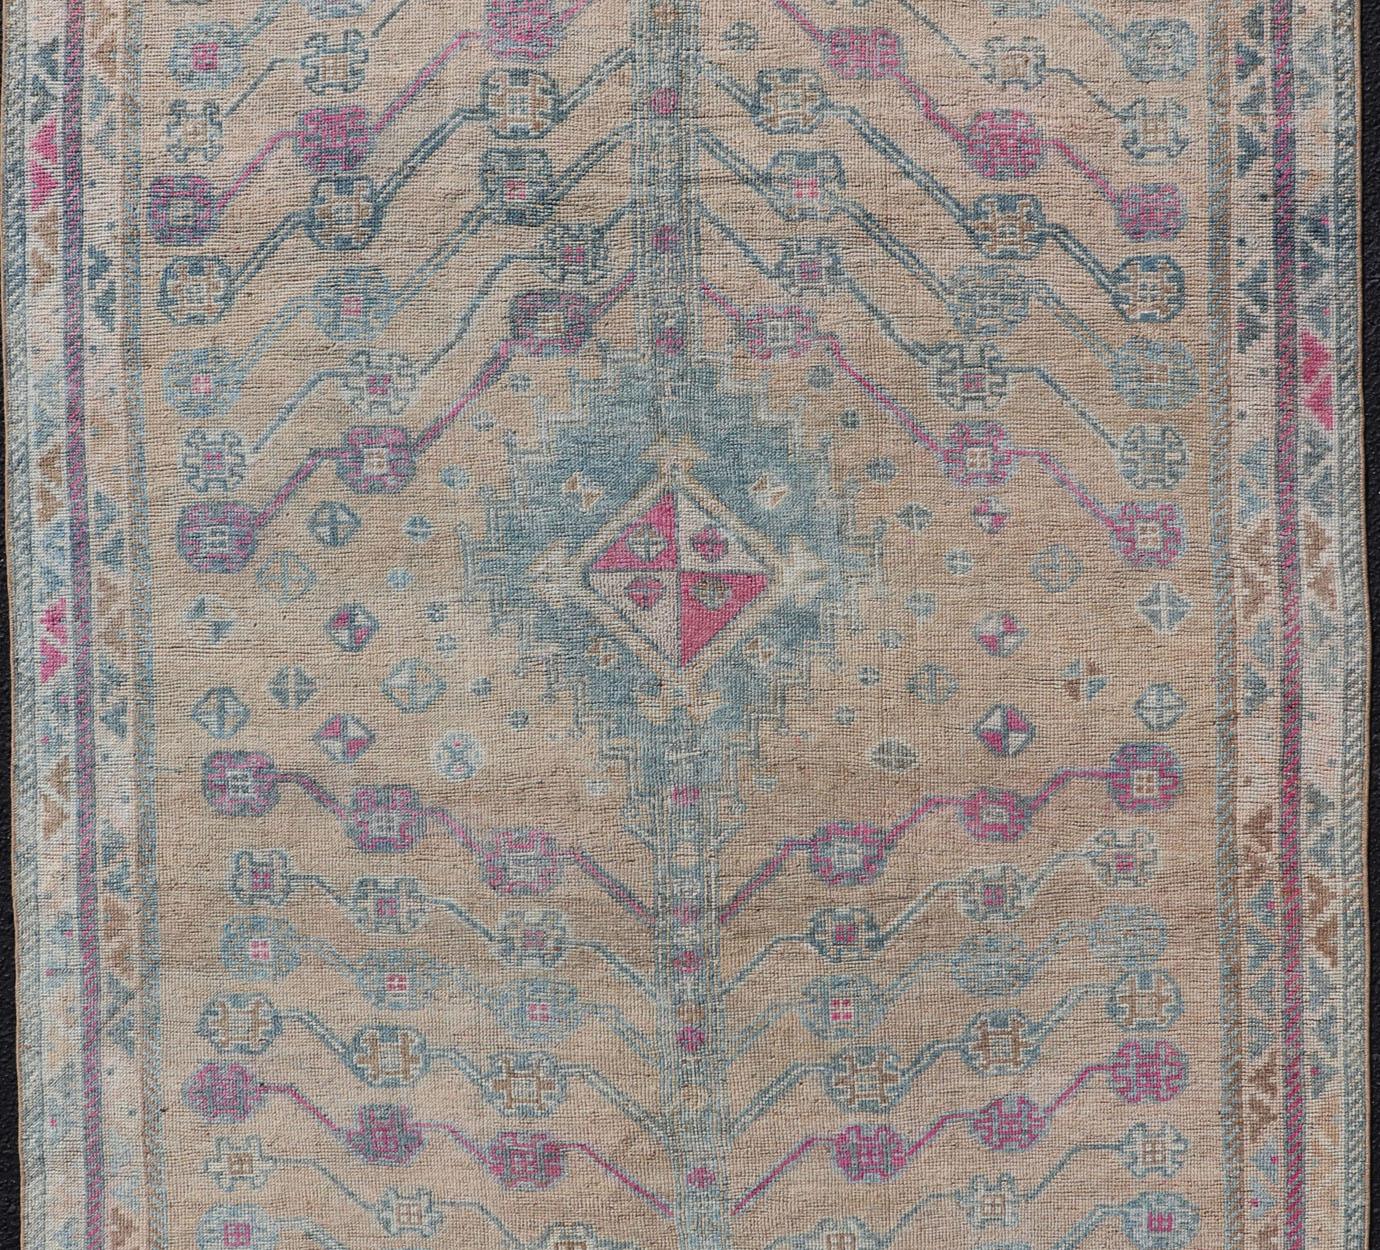 Wool Vintage Persian Shiraz with Tribal Design in Soft Yellow, Pink, and Blue Gray